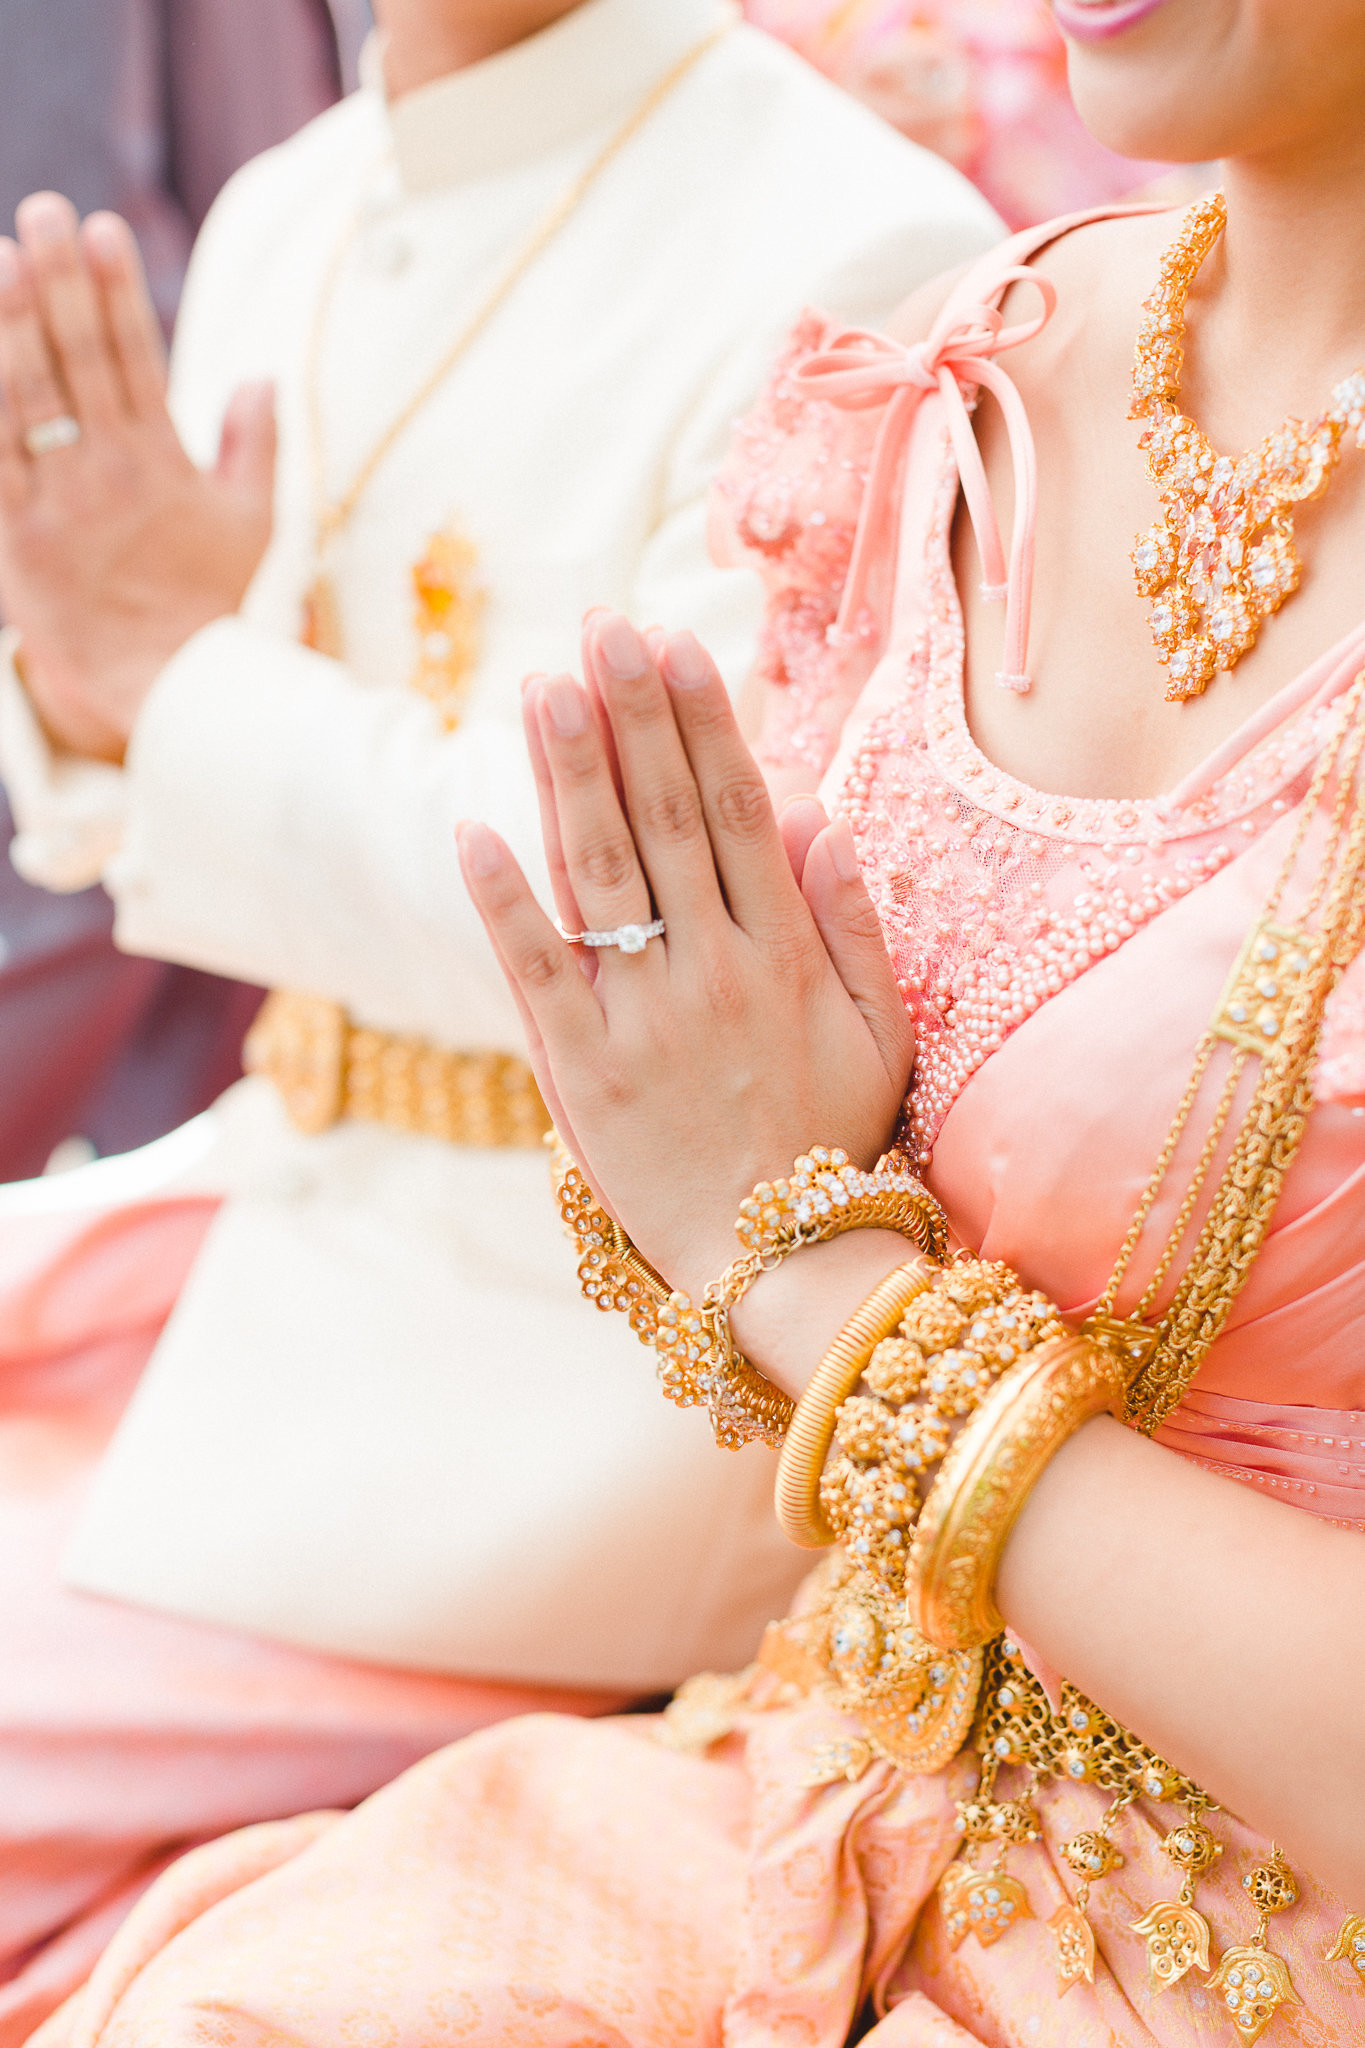 photographe-montreal-mariage-culturel-traditionnel-cambodgien-lisa-renault-photographie-traditional-cultural-cambodian-wedding-45